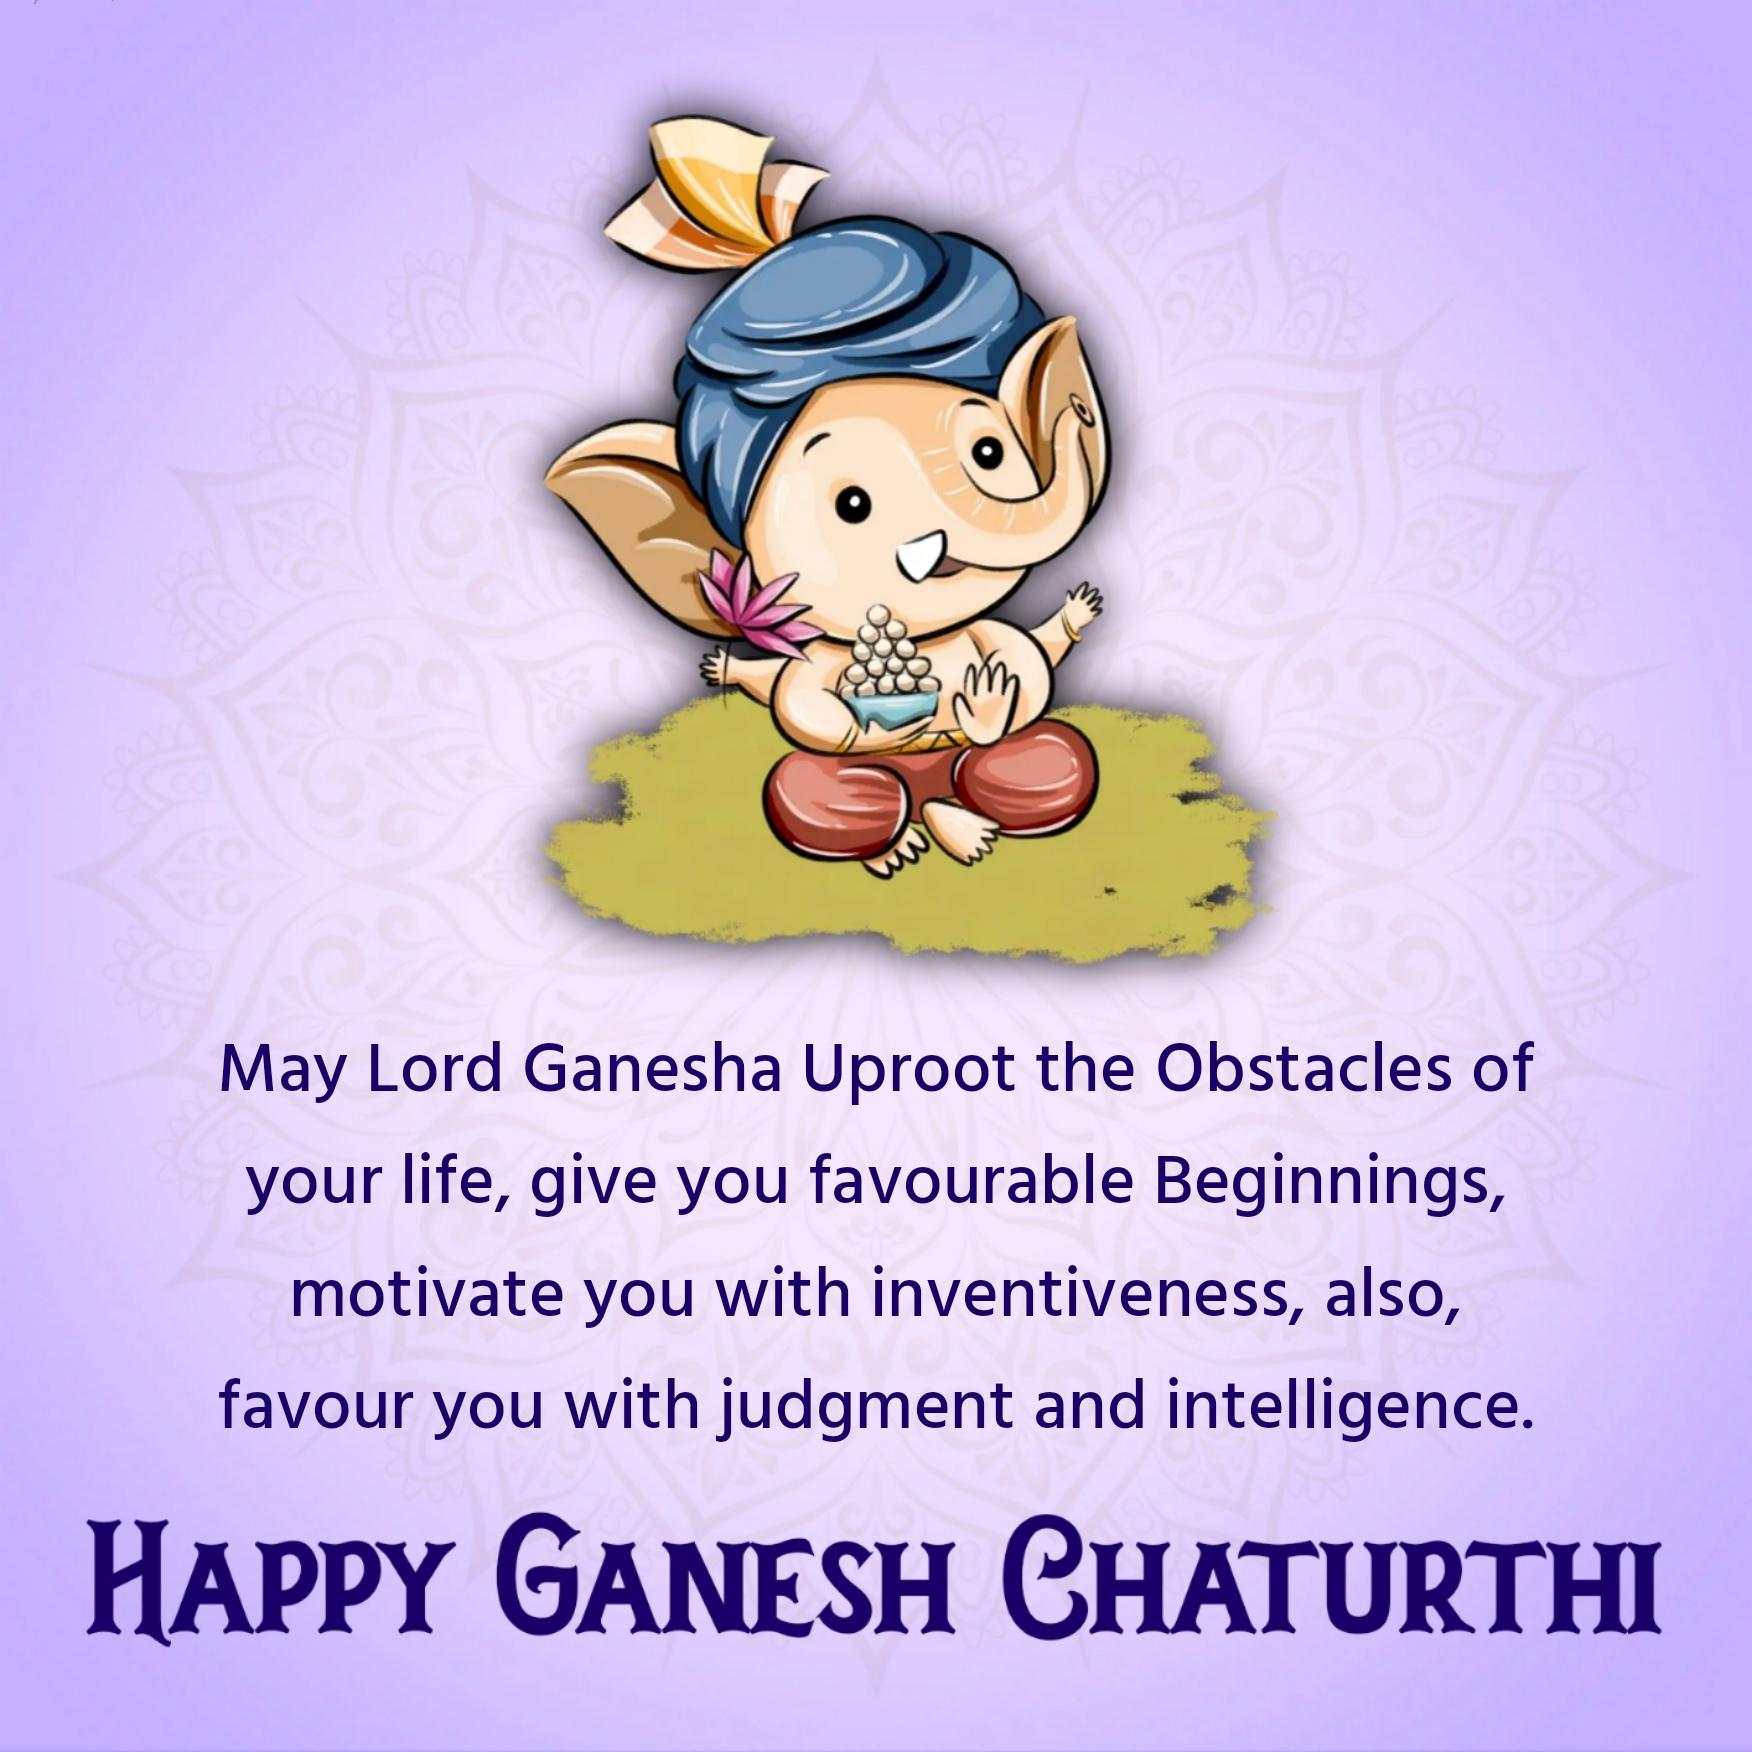 May Lord Ganesha Uproot the Obstacles of your life